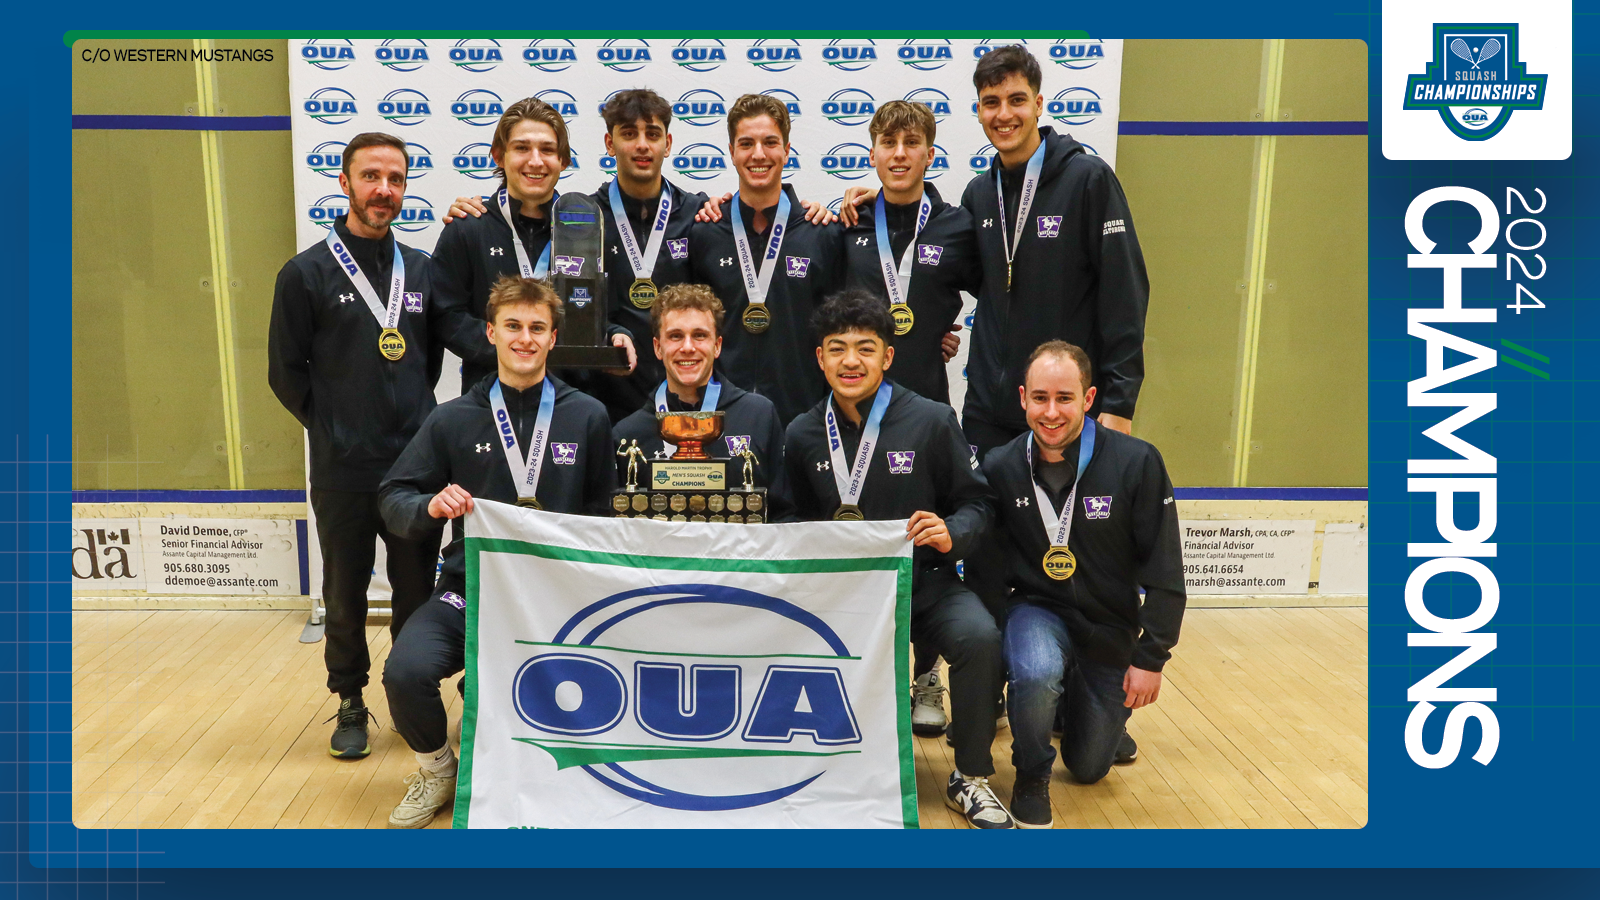 Predominantly blue graphic covered mostly by 2024 OUA Men's Squash Championship banner photo, with the corresponding championship logo and white text reading '2024 Champions' on the right side